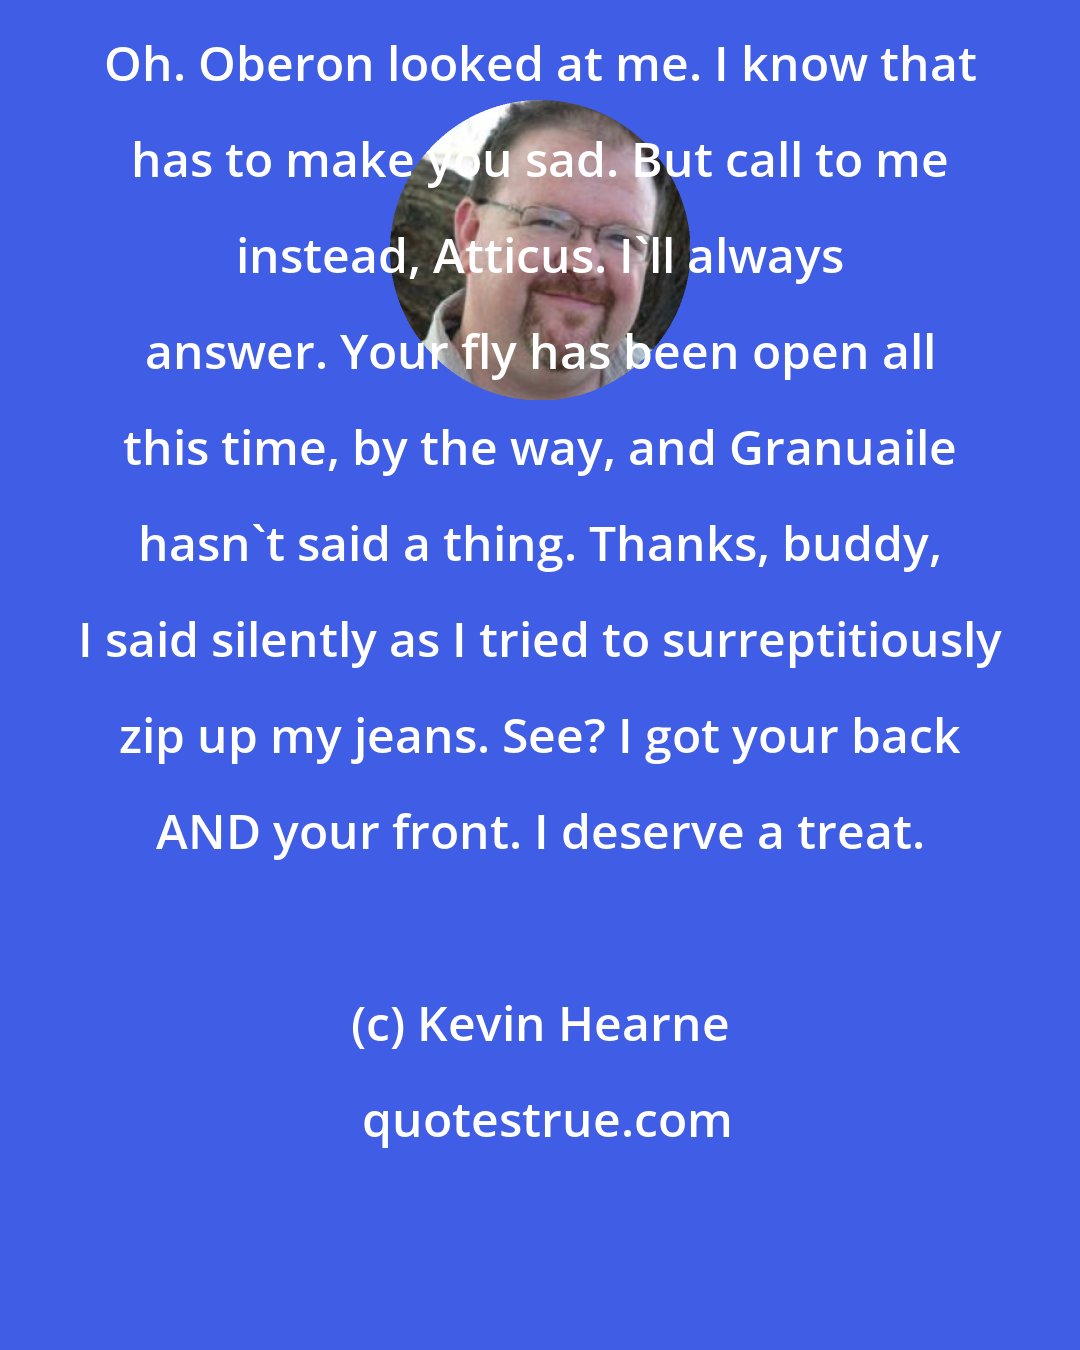 Kevin Hearne: Oh. Oberon looked at me. I know that has to make you sad. But call to me instead, Atticus. I'll always answer. Your fly has been open all this time, by the way, and Granuaile hasn't said a thing. Thanks, buddy, I said silently as I tried to surreptitiously zip up my jeans. See? I got your back AND your front. I deserve a treat.